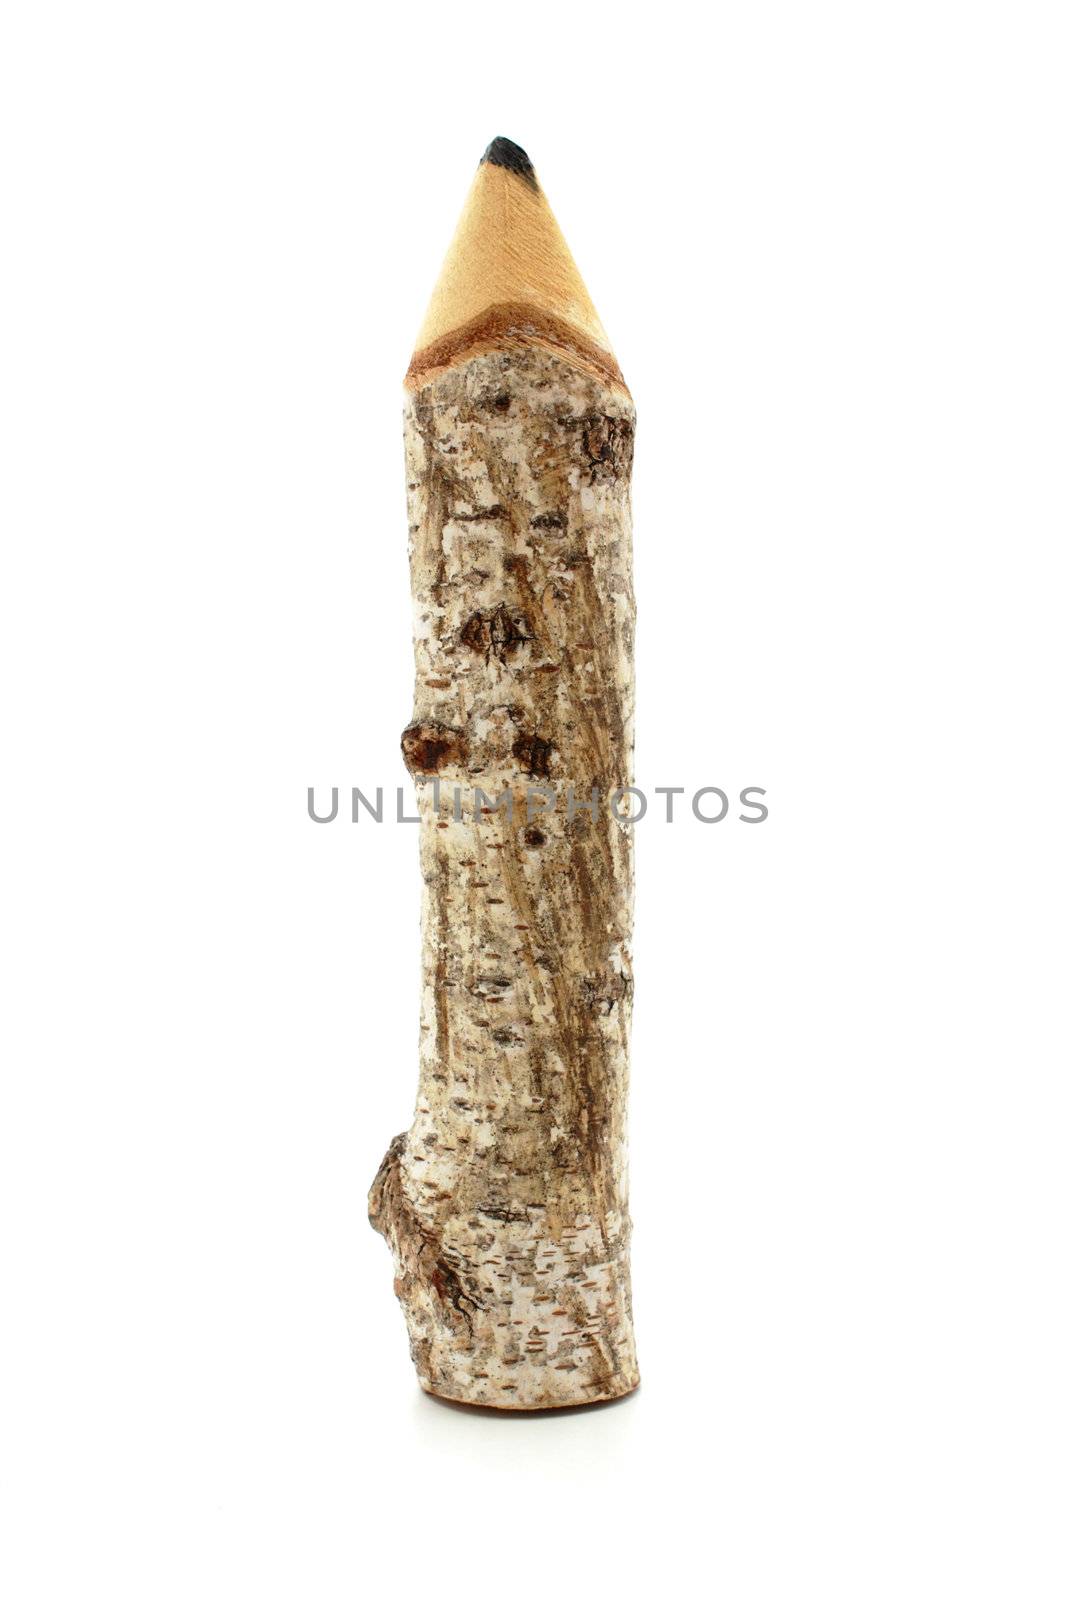 pencil made from birchwood isolated on white